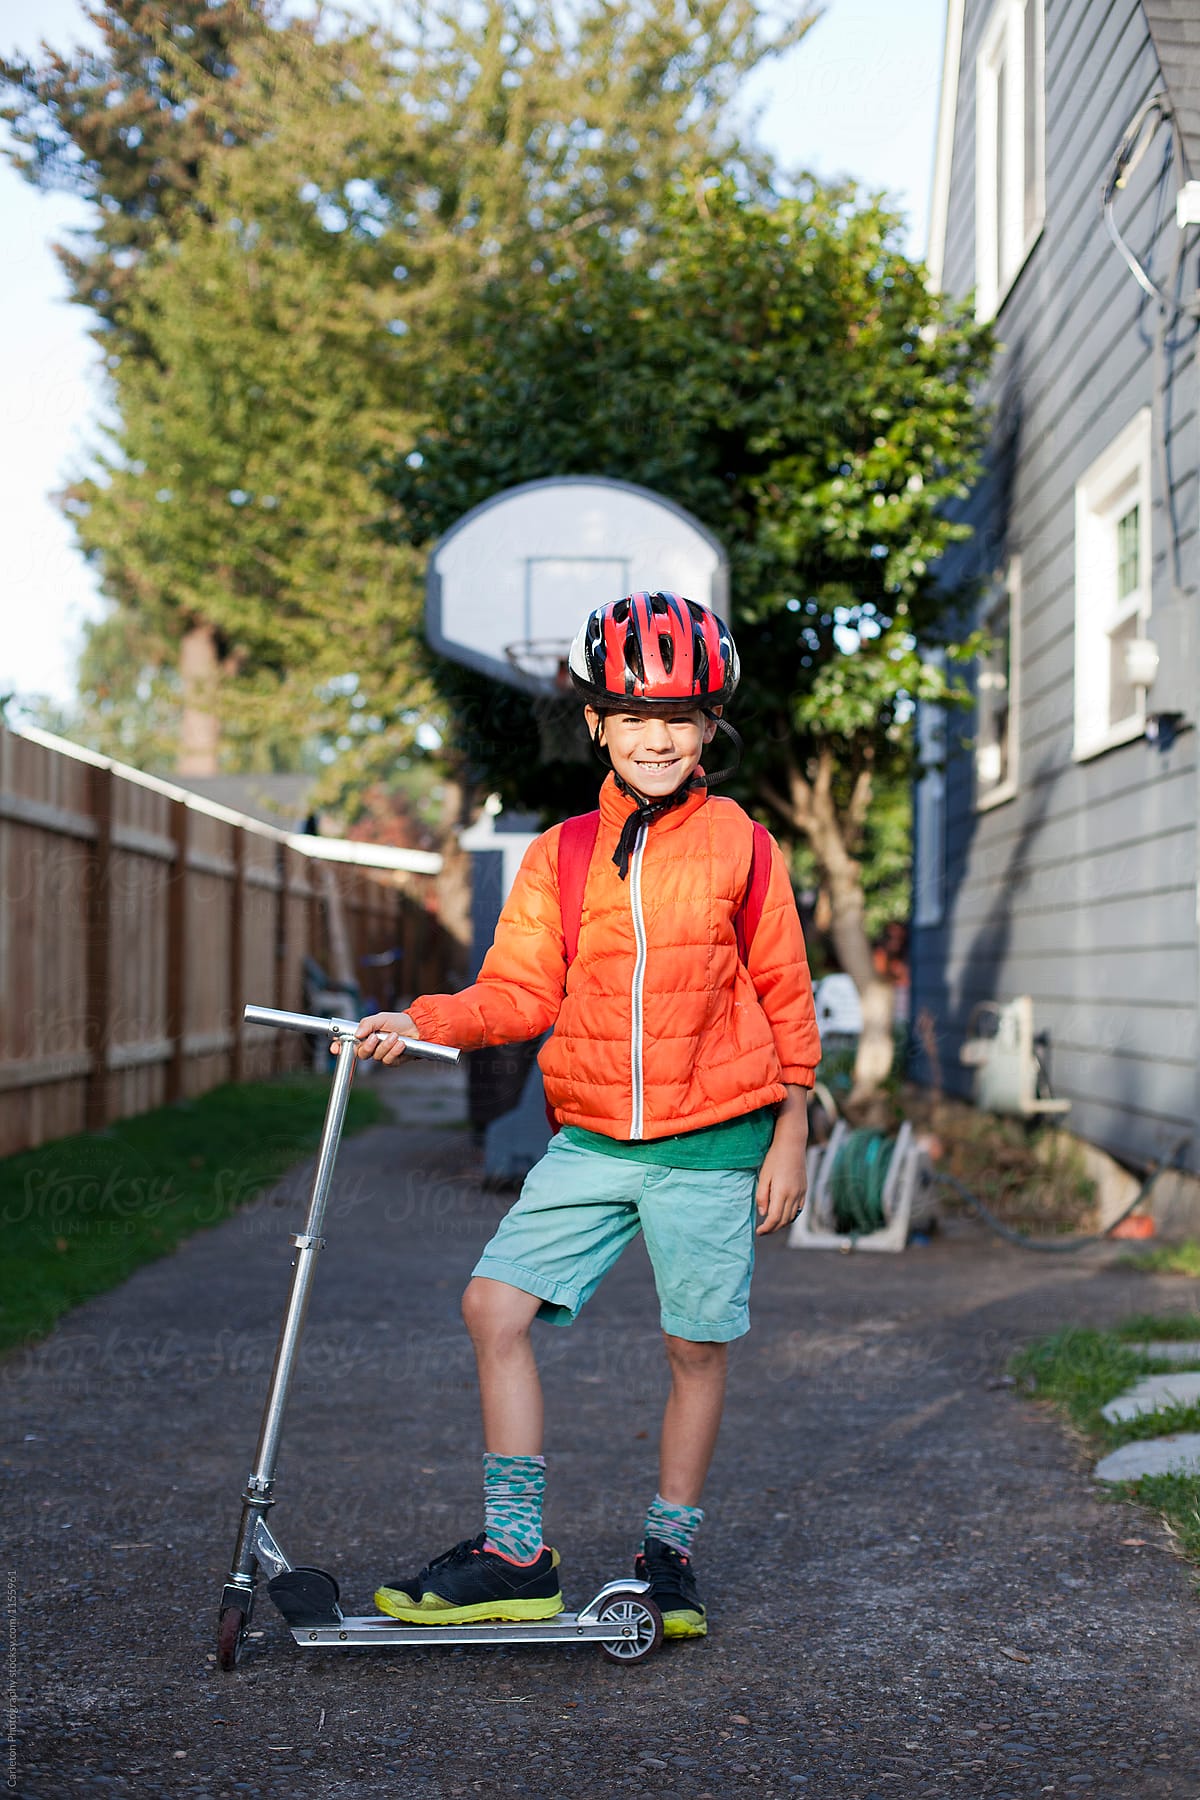 Seven year old boy is ready to go to school on his scooter